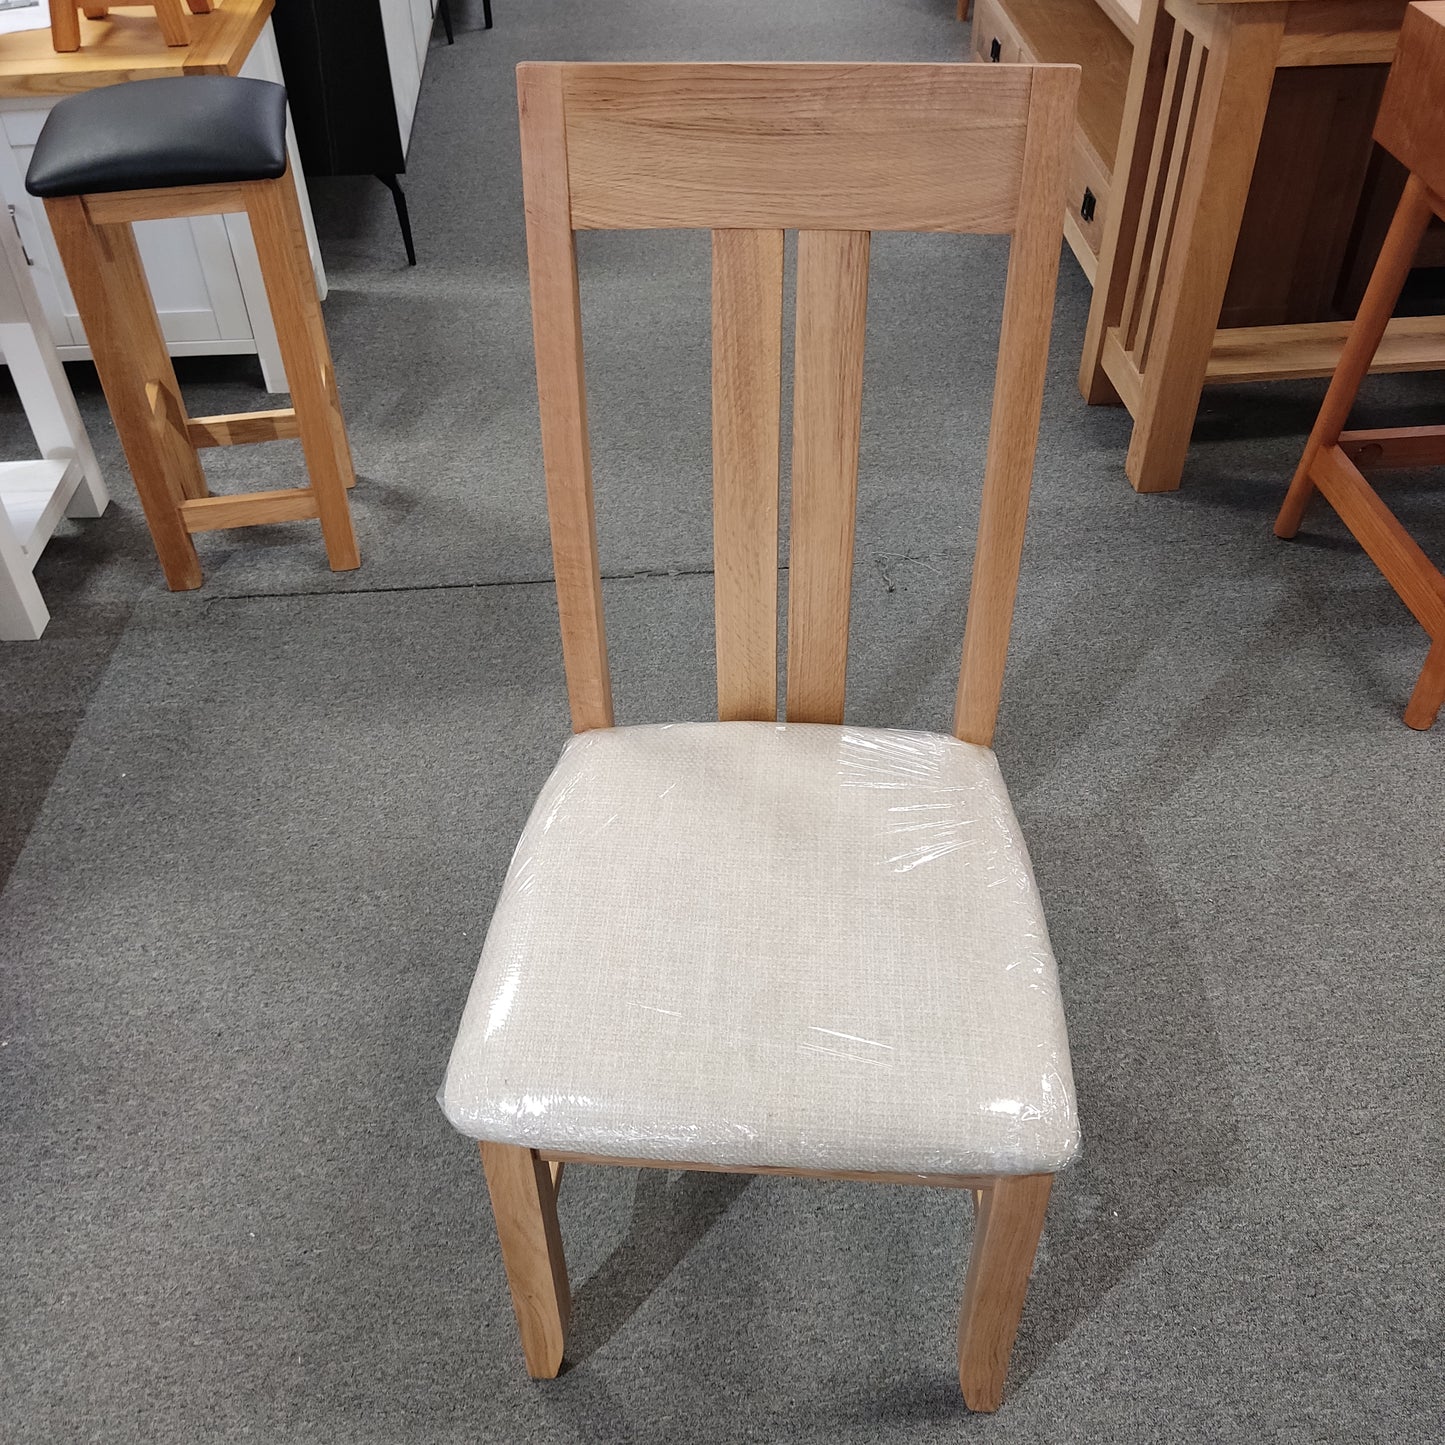 Solid oak dining chair, natural color